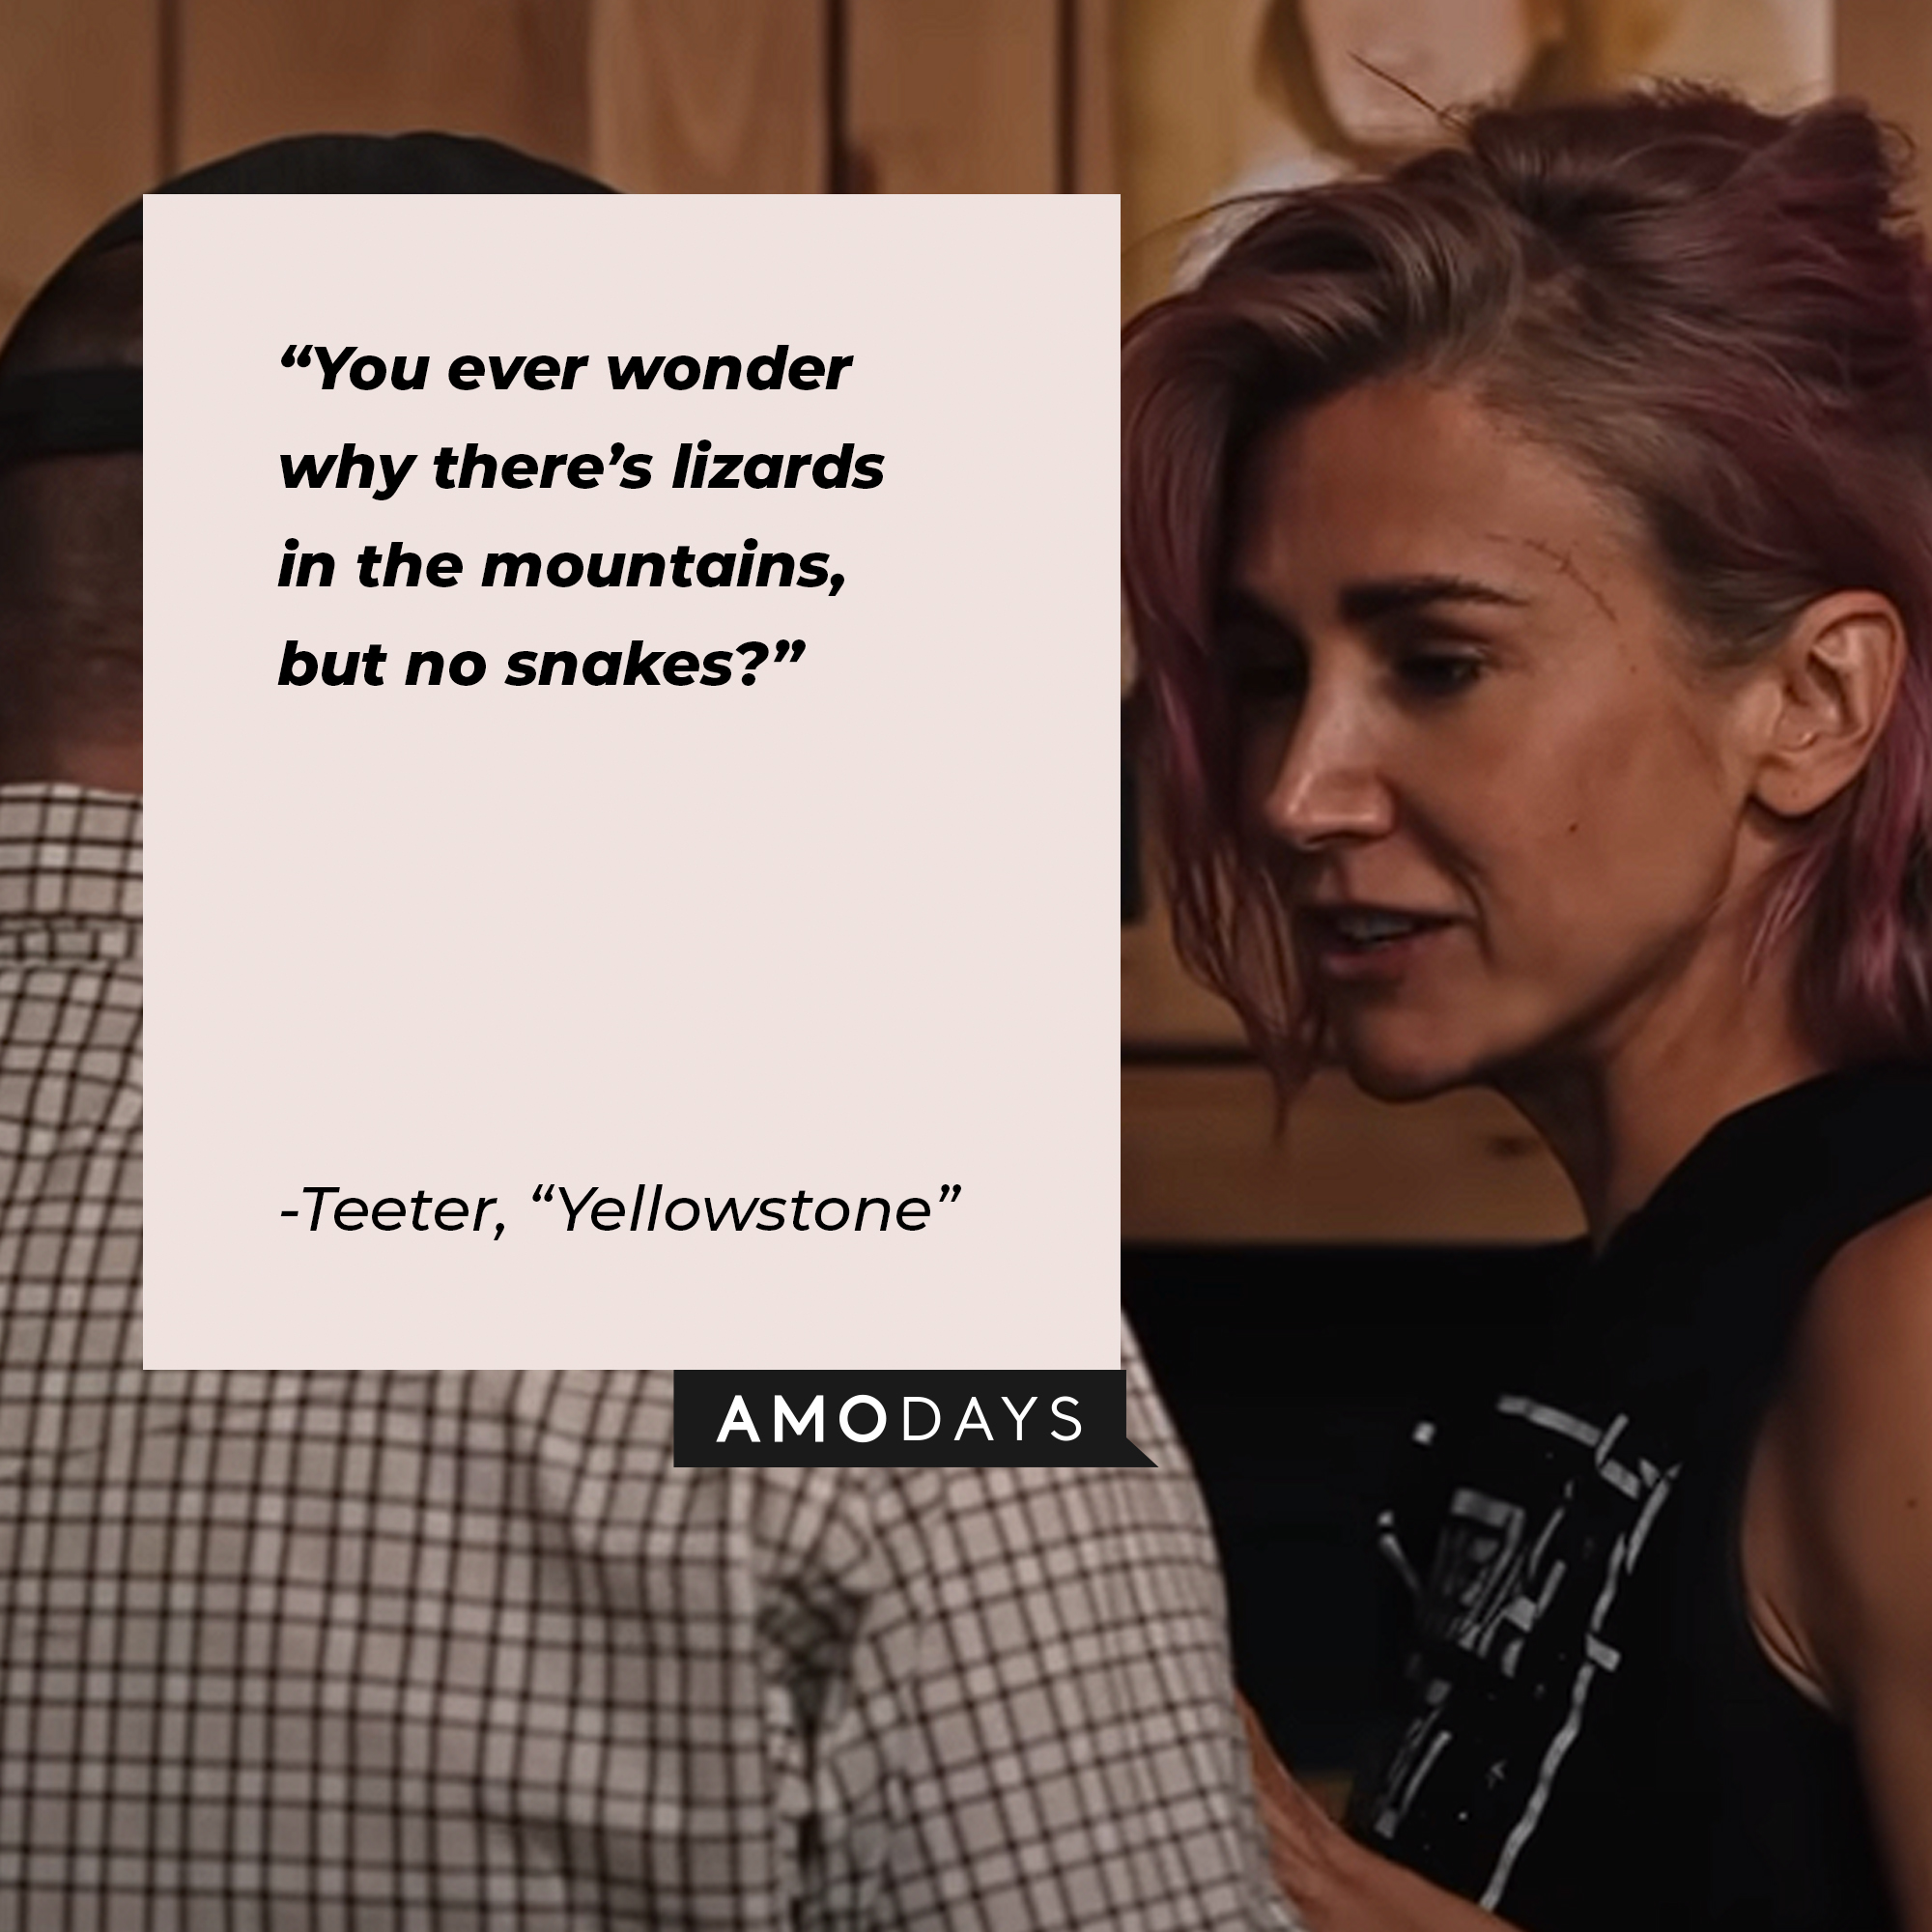 Teeter’s quote from “Yellowstone”: “You ever wonder why there’s lizards in the mountains, but no snakes?” | Source: youtube.com/yellowstone